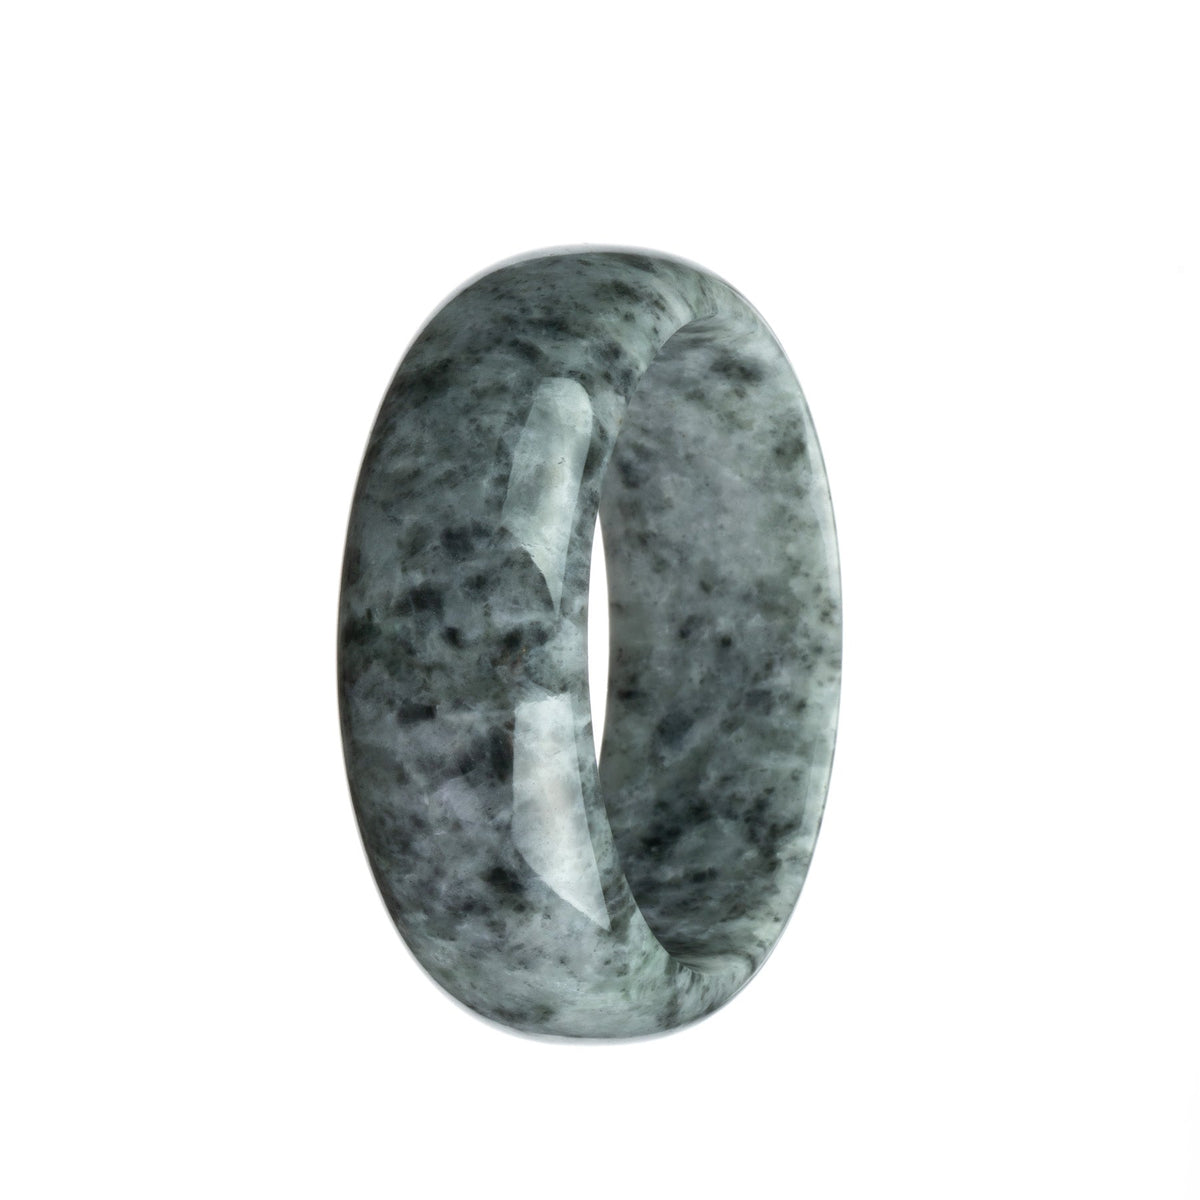 A beautiful grey patterned jade bangle bracelet with a half moon shape, crafted from genuine natural jadeite jade.